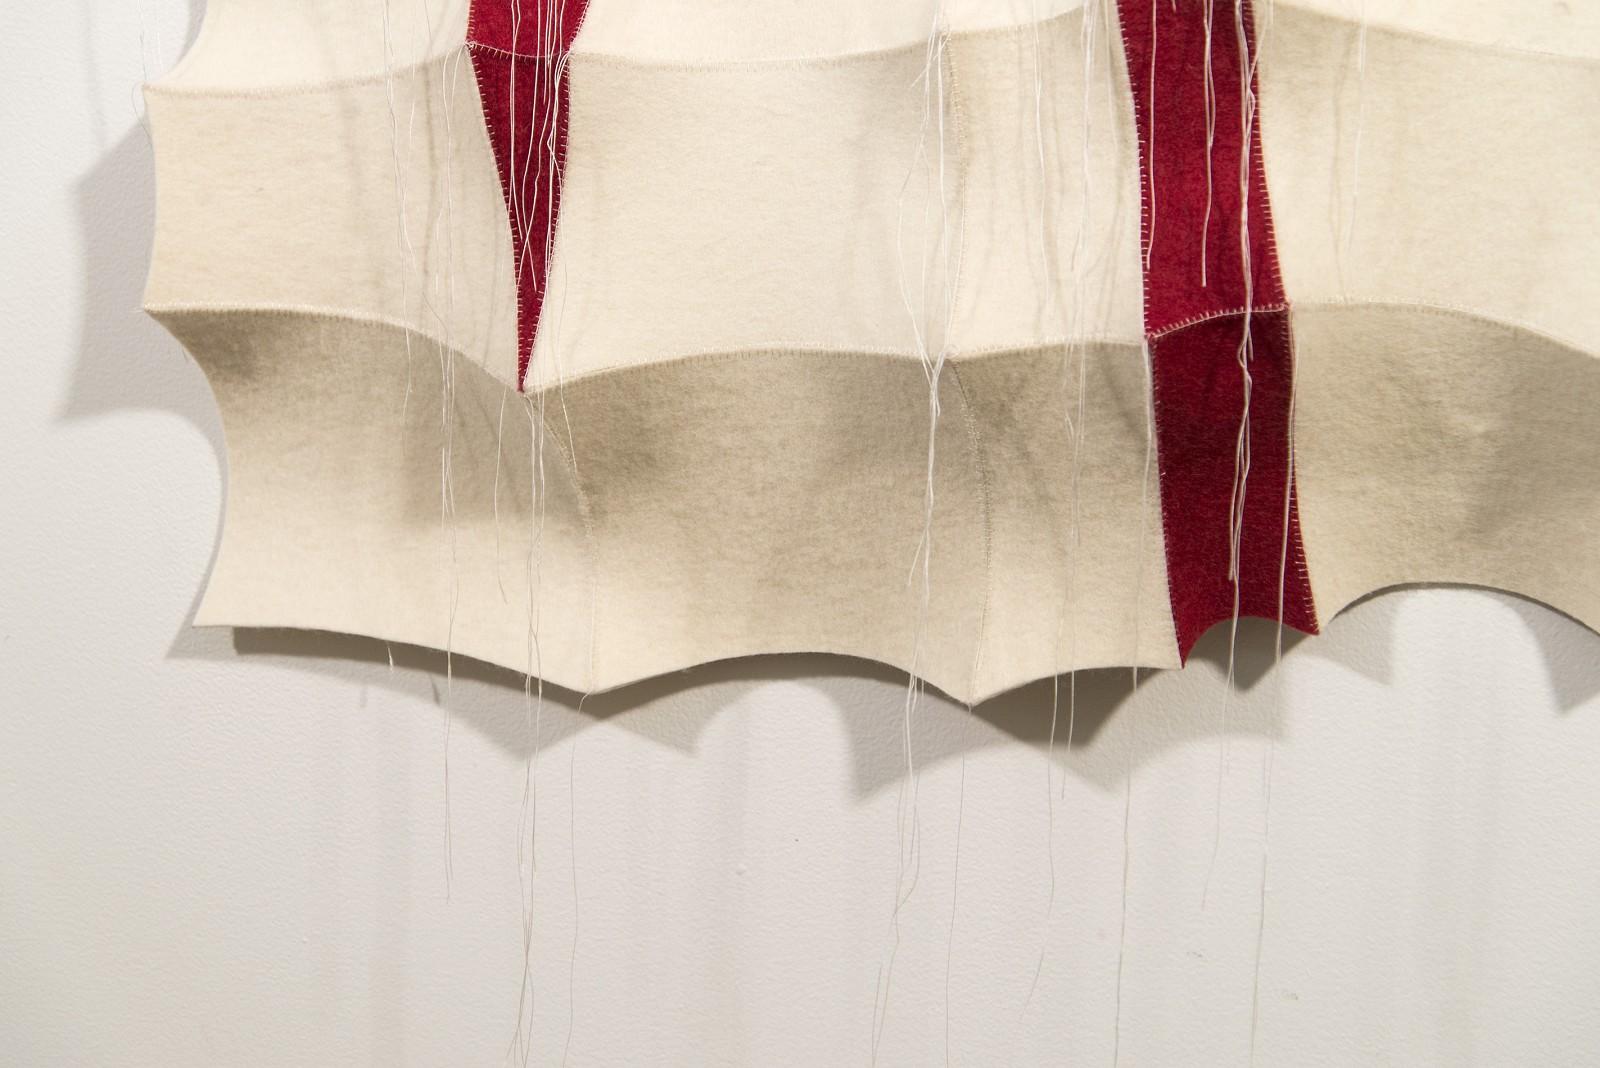 Tumsae 7 - red, white, pattern, wall hanging, 3D, felt, textile, tapestry - Beige Abstract Sculpture by Chung-Im Kim